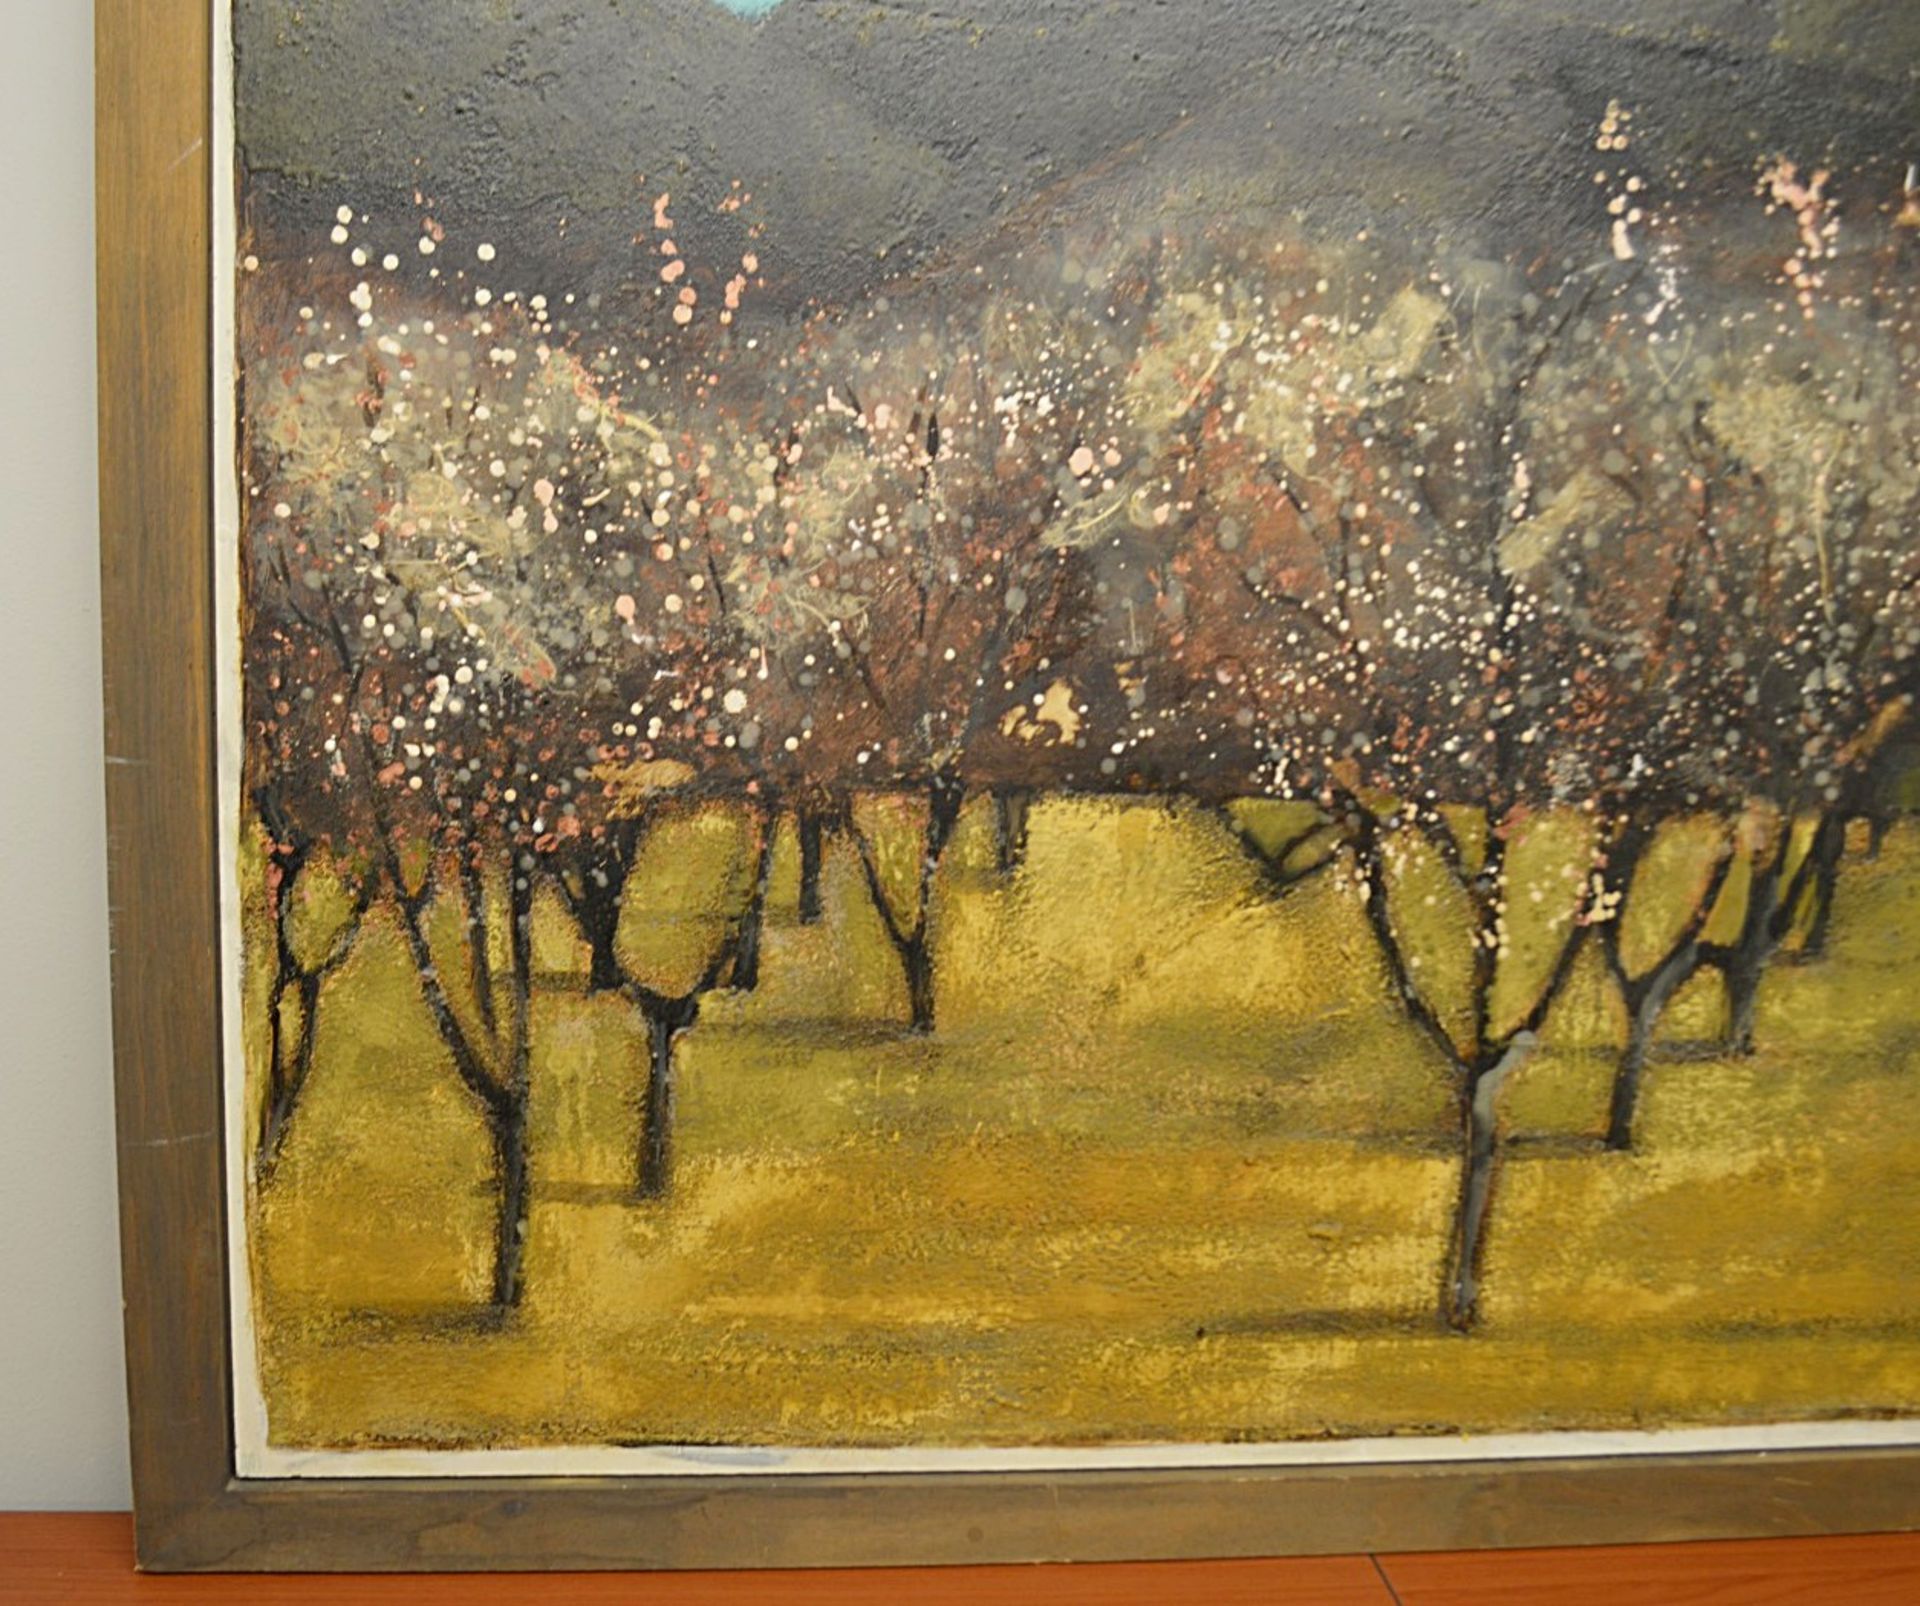 1 x Original Signed Framed Painting Of A Spanish Orchard By Lydia Bauman (1997) - Dimensions: 122 - Image 2 of 8